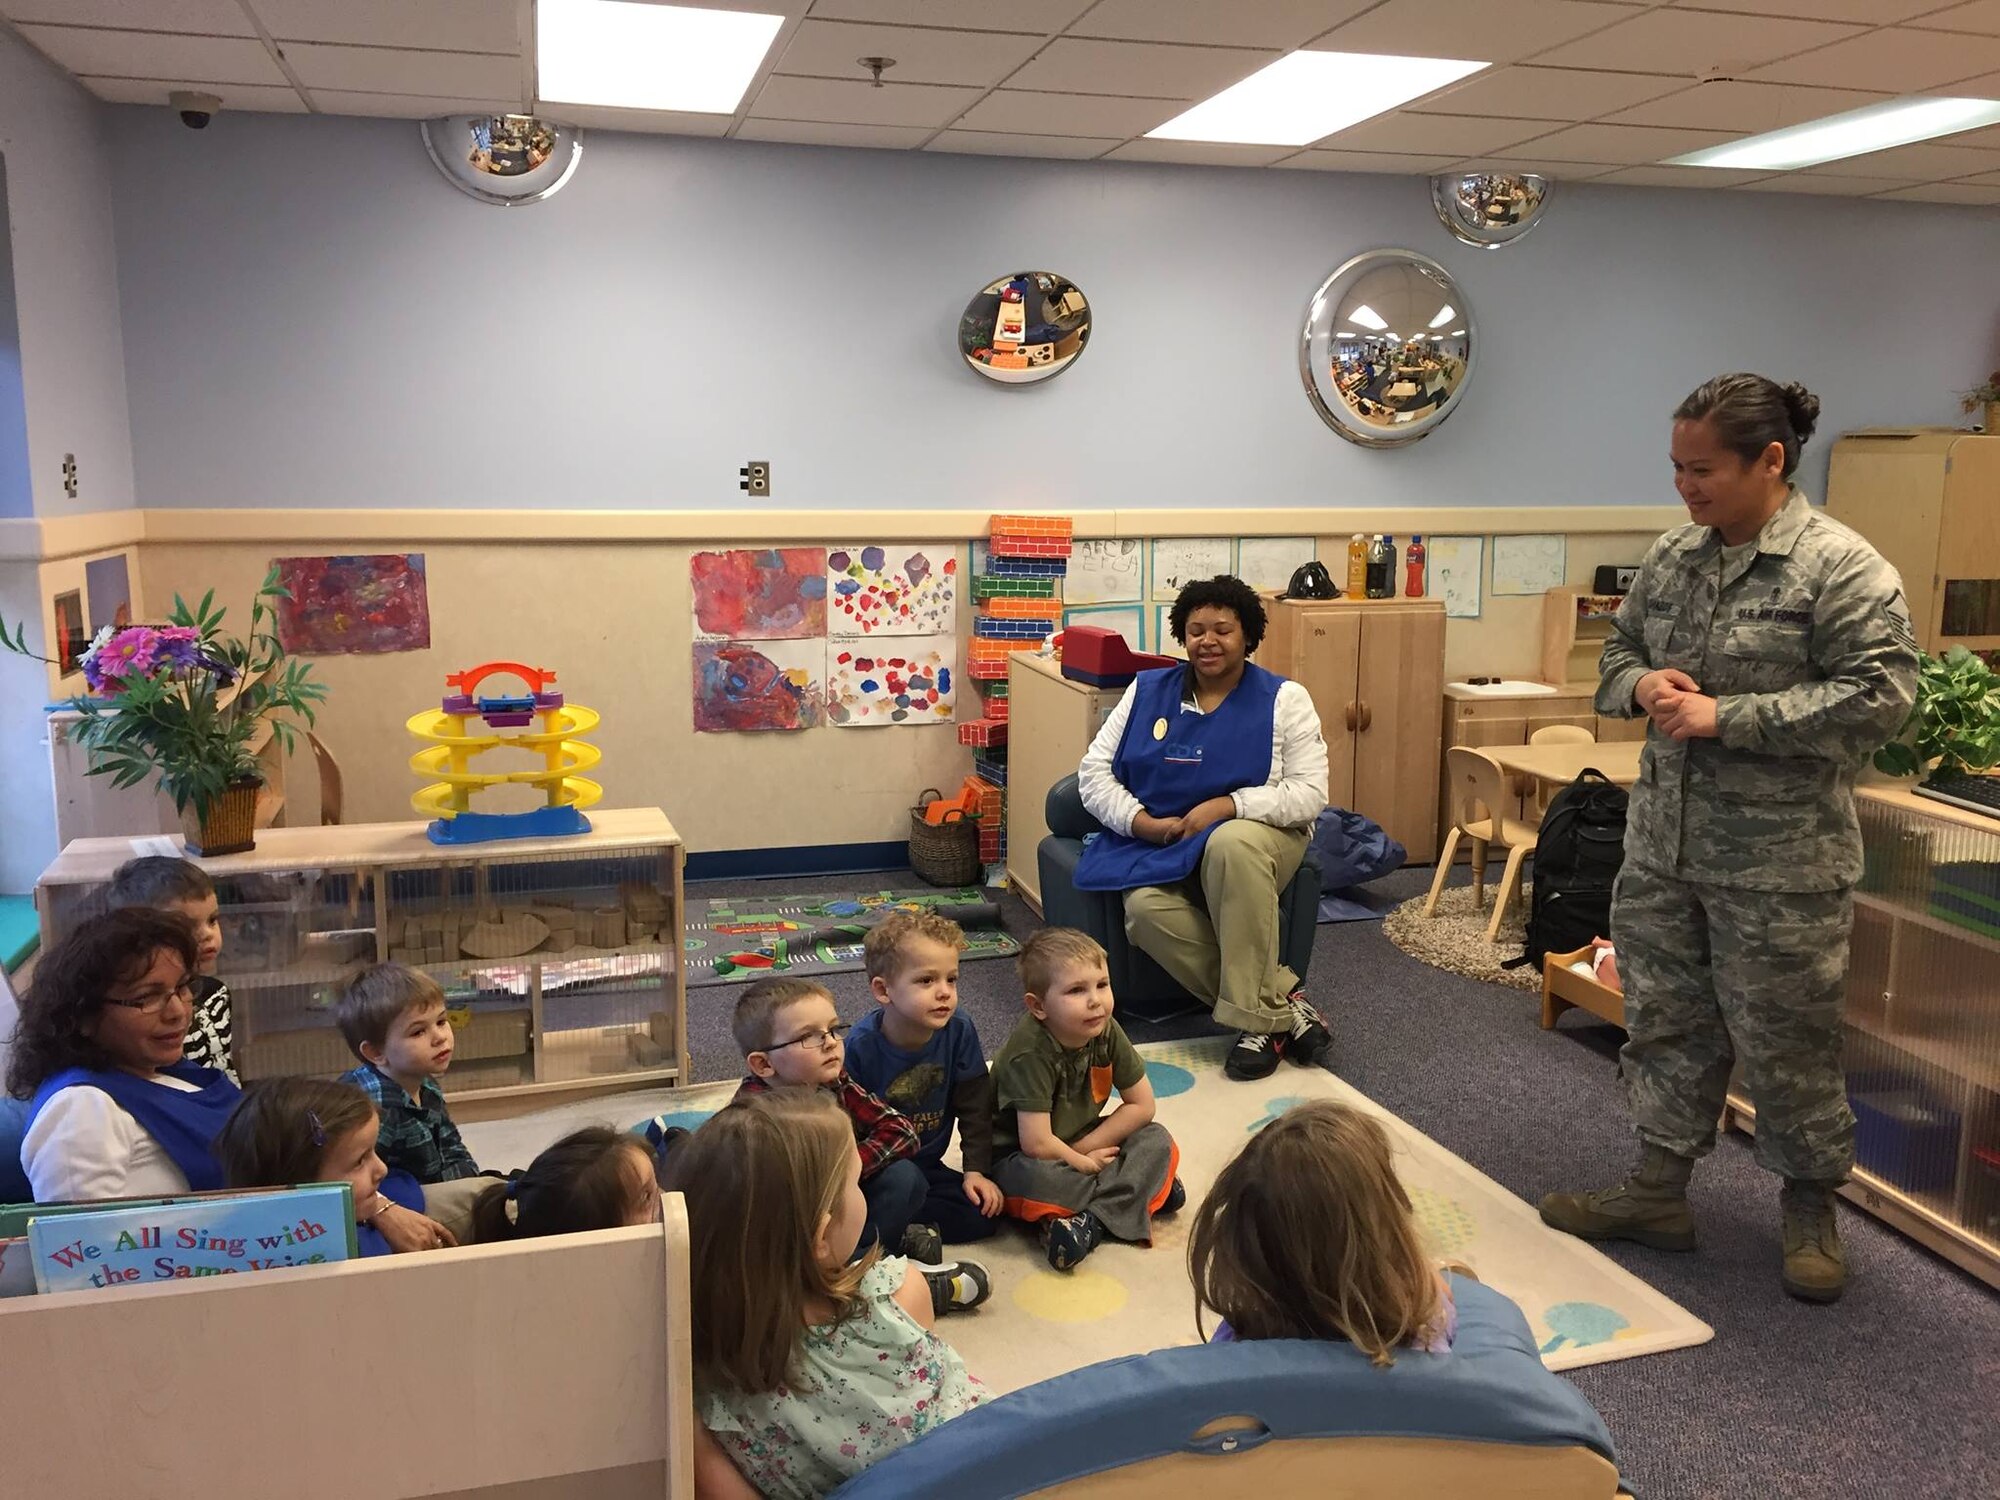 On Feb. 5, members of the Dental Squadron from the 779th Medical Group went to the Child Development Center on Joint Base Andrews to teach the kids about good dental health. Master Sgt. Millicent Cavazos, dental hygienist , talked to the children and answered their questions about brushing, flossing, rinsing, and eating healthy snacks. (AF photo by Melanie Moore/Released)

